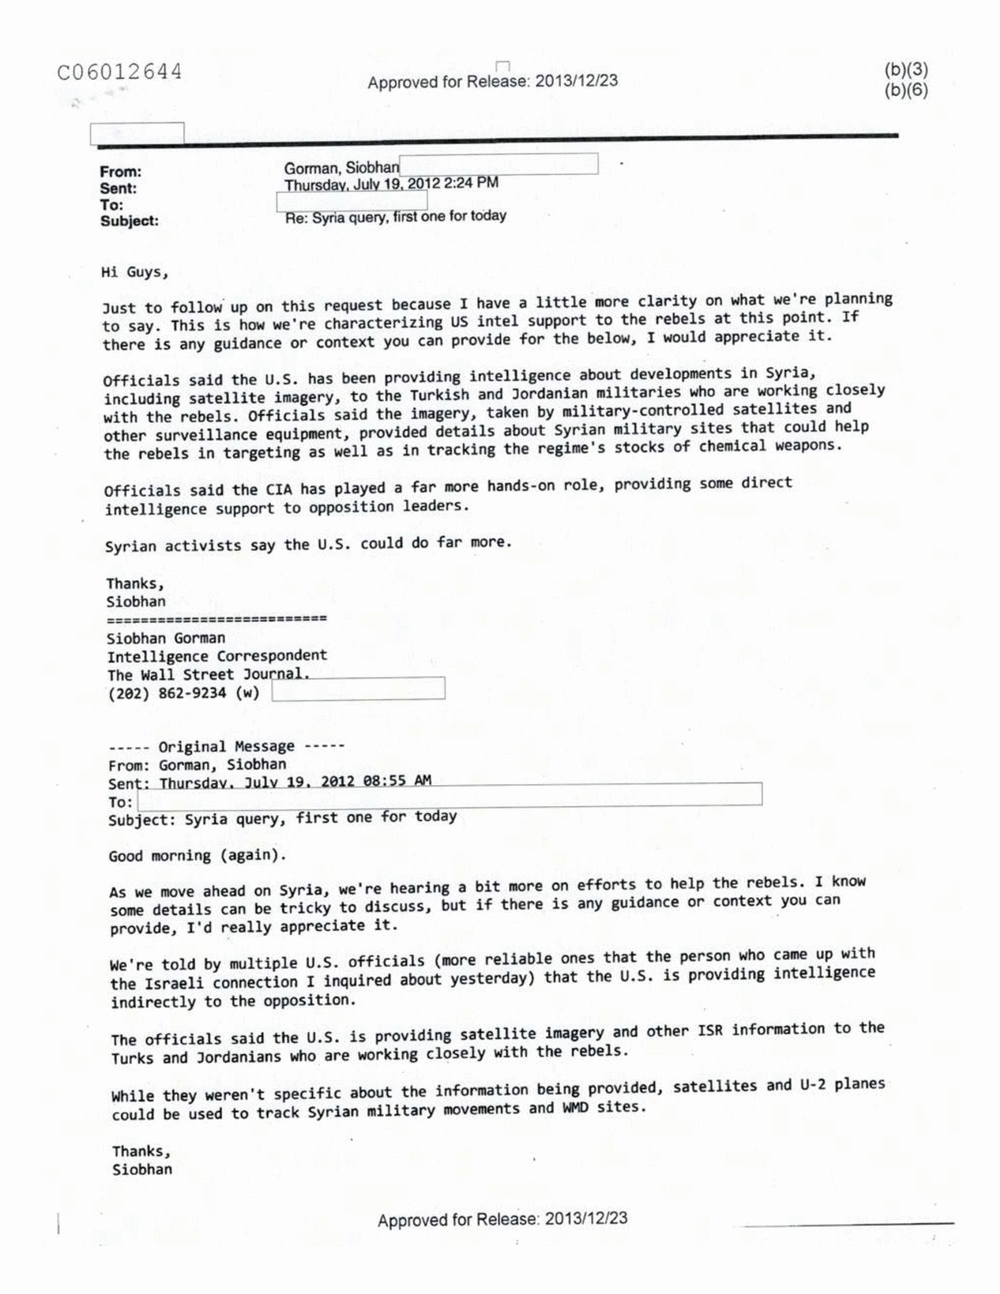 Page 212 from Email Correspondence Between Reporters and CIA Flacks